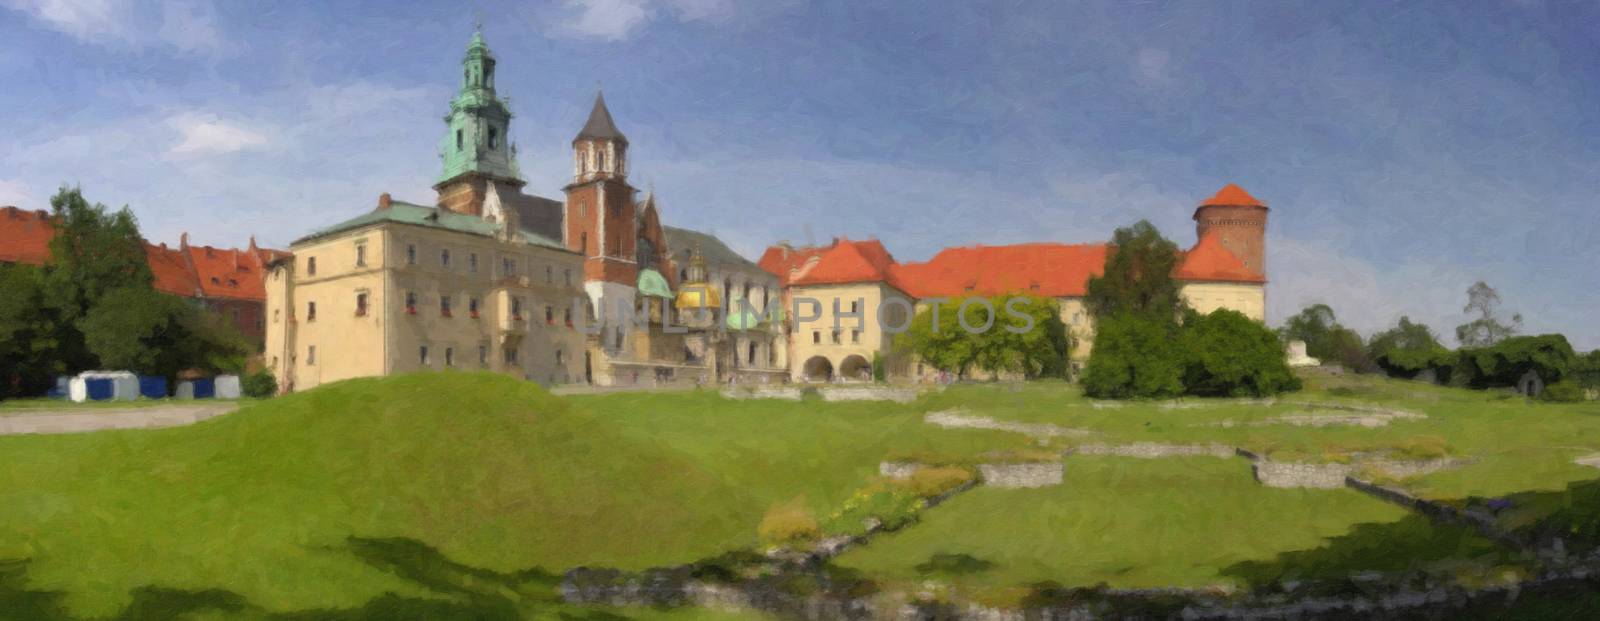 The Wawel Royal Castle in Cracow, Poland. Digitally created oil painting on a canvas.